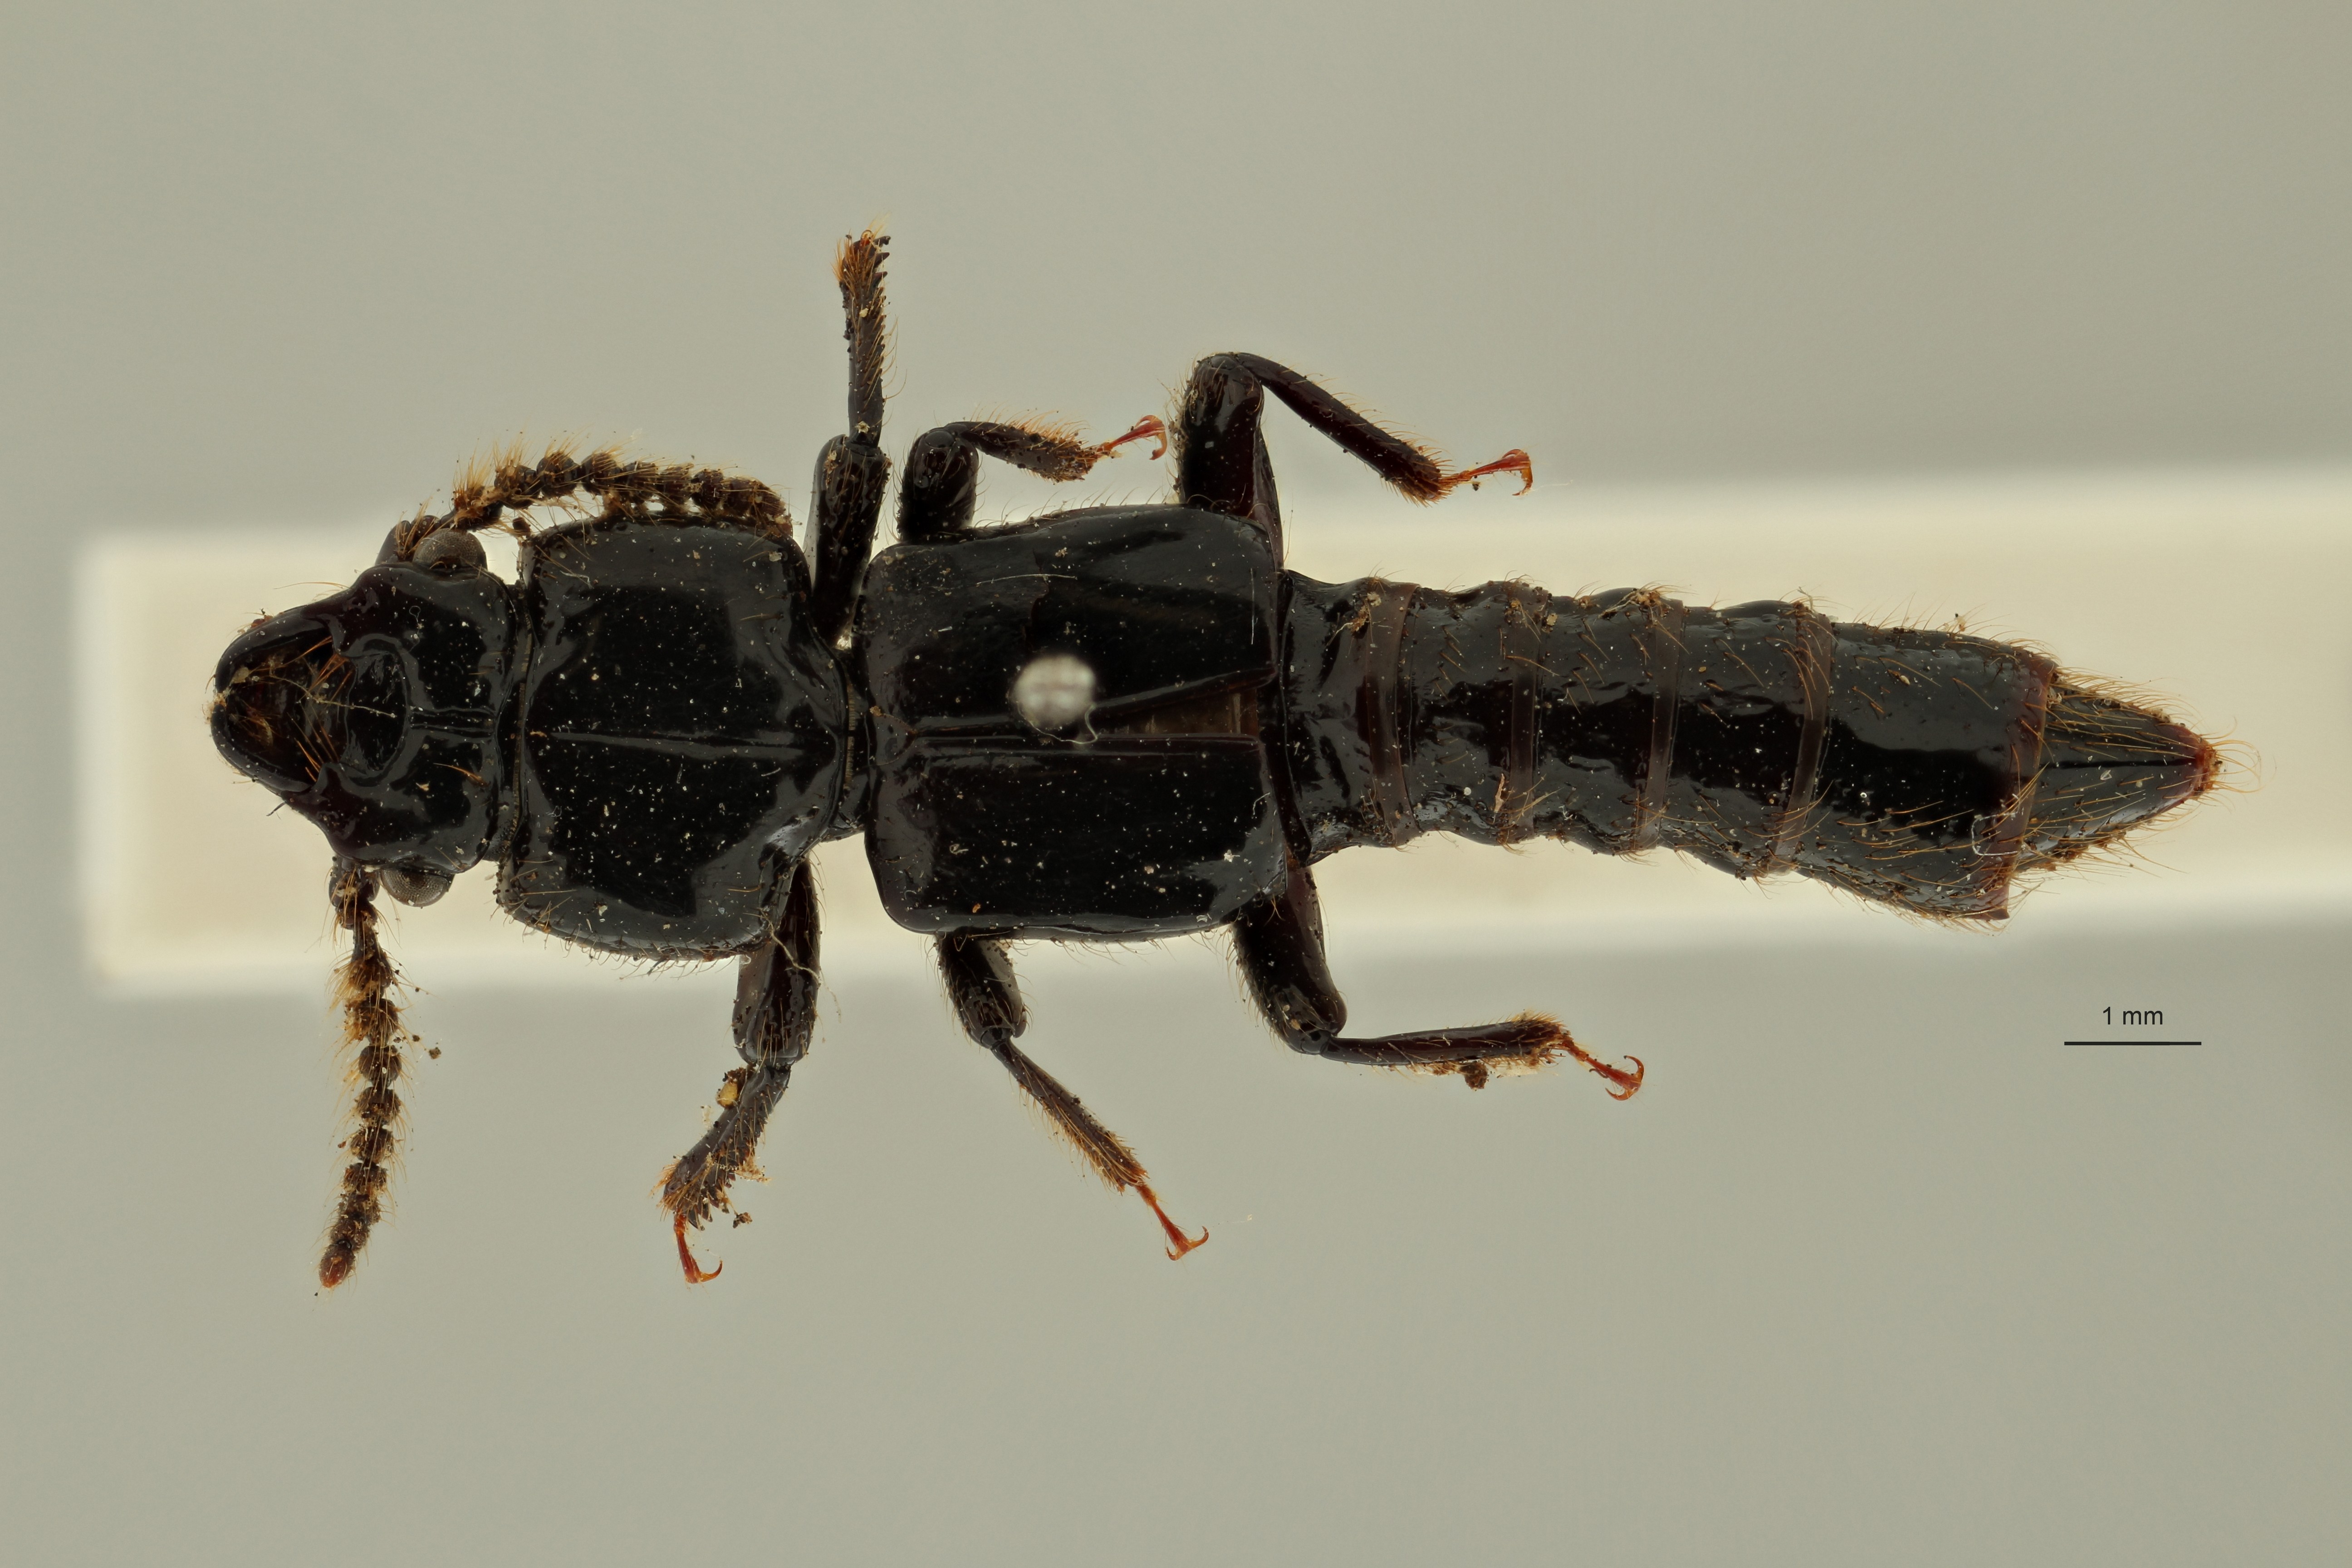 Priochirus forticornis st D ZS PMax Scaled.jpeg